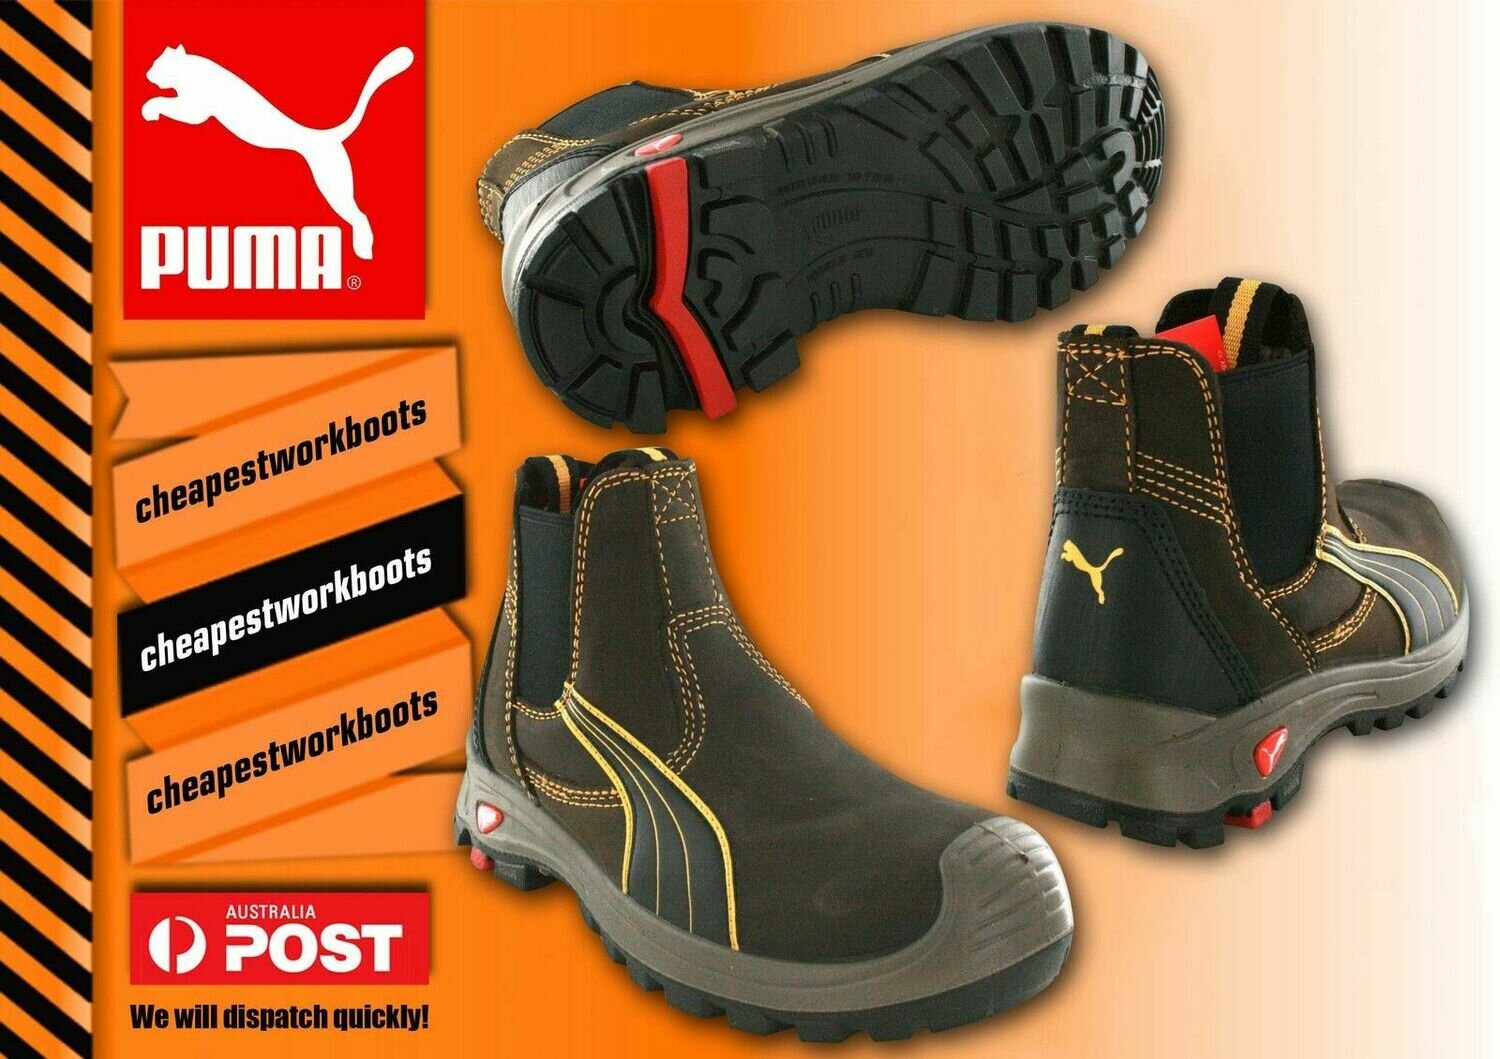 Puma Tanami BROWN 630267 Work Boots FREE SOCKS Composite Safety Elastic Sided